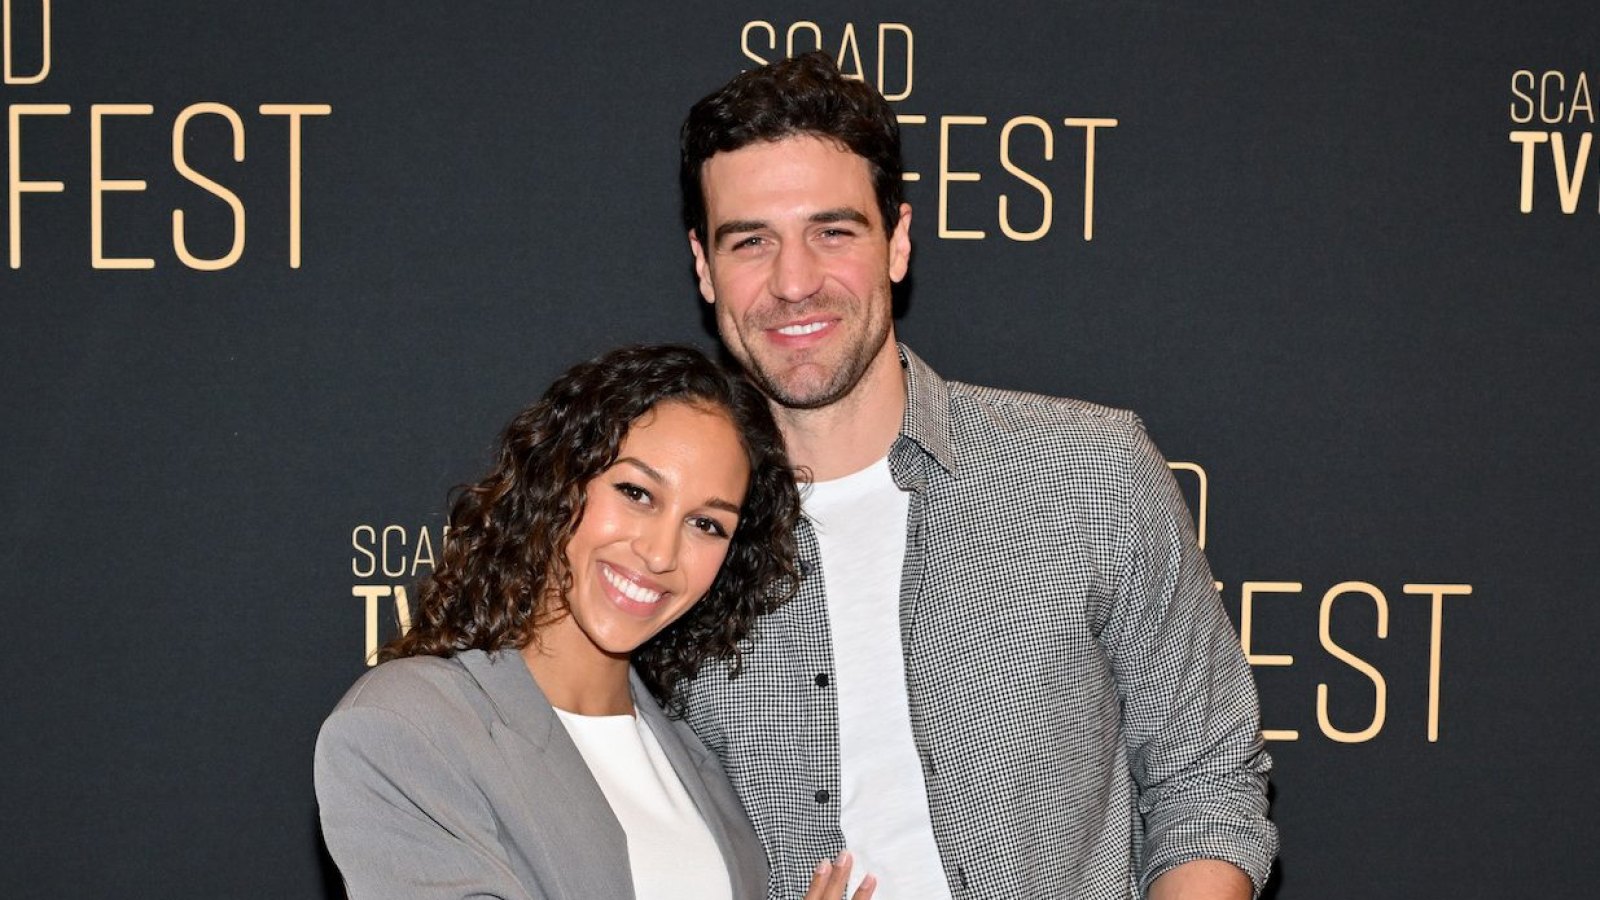 Bachelor-s Serena Pitt and Joe Amabile Get Married for 2nd Time